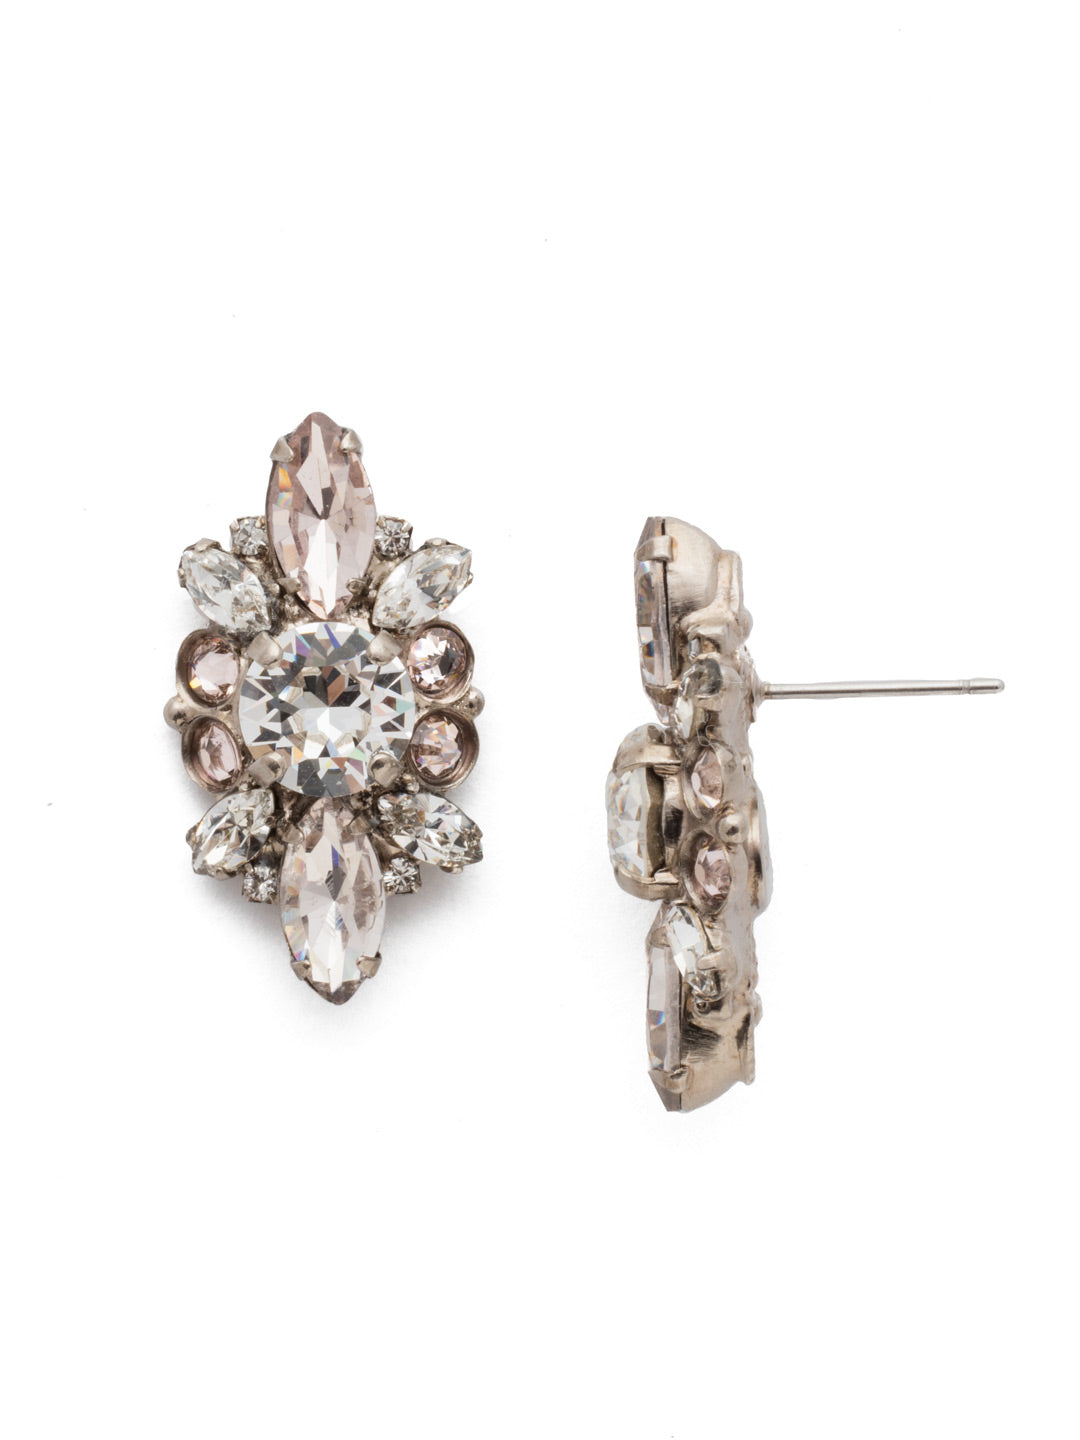 Aubretia Earring - EDT3ASPLS - <p>A statement stud with a symmetrical pattern of navette and round cut crystals radiating from a central, round stone. From Sorrelli's Soft Petal collection in our Antique Silver-tone finish.</p>